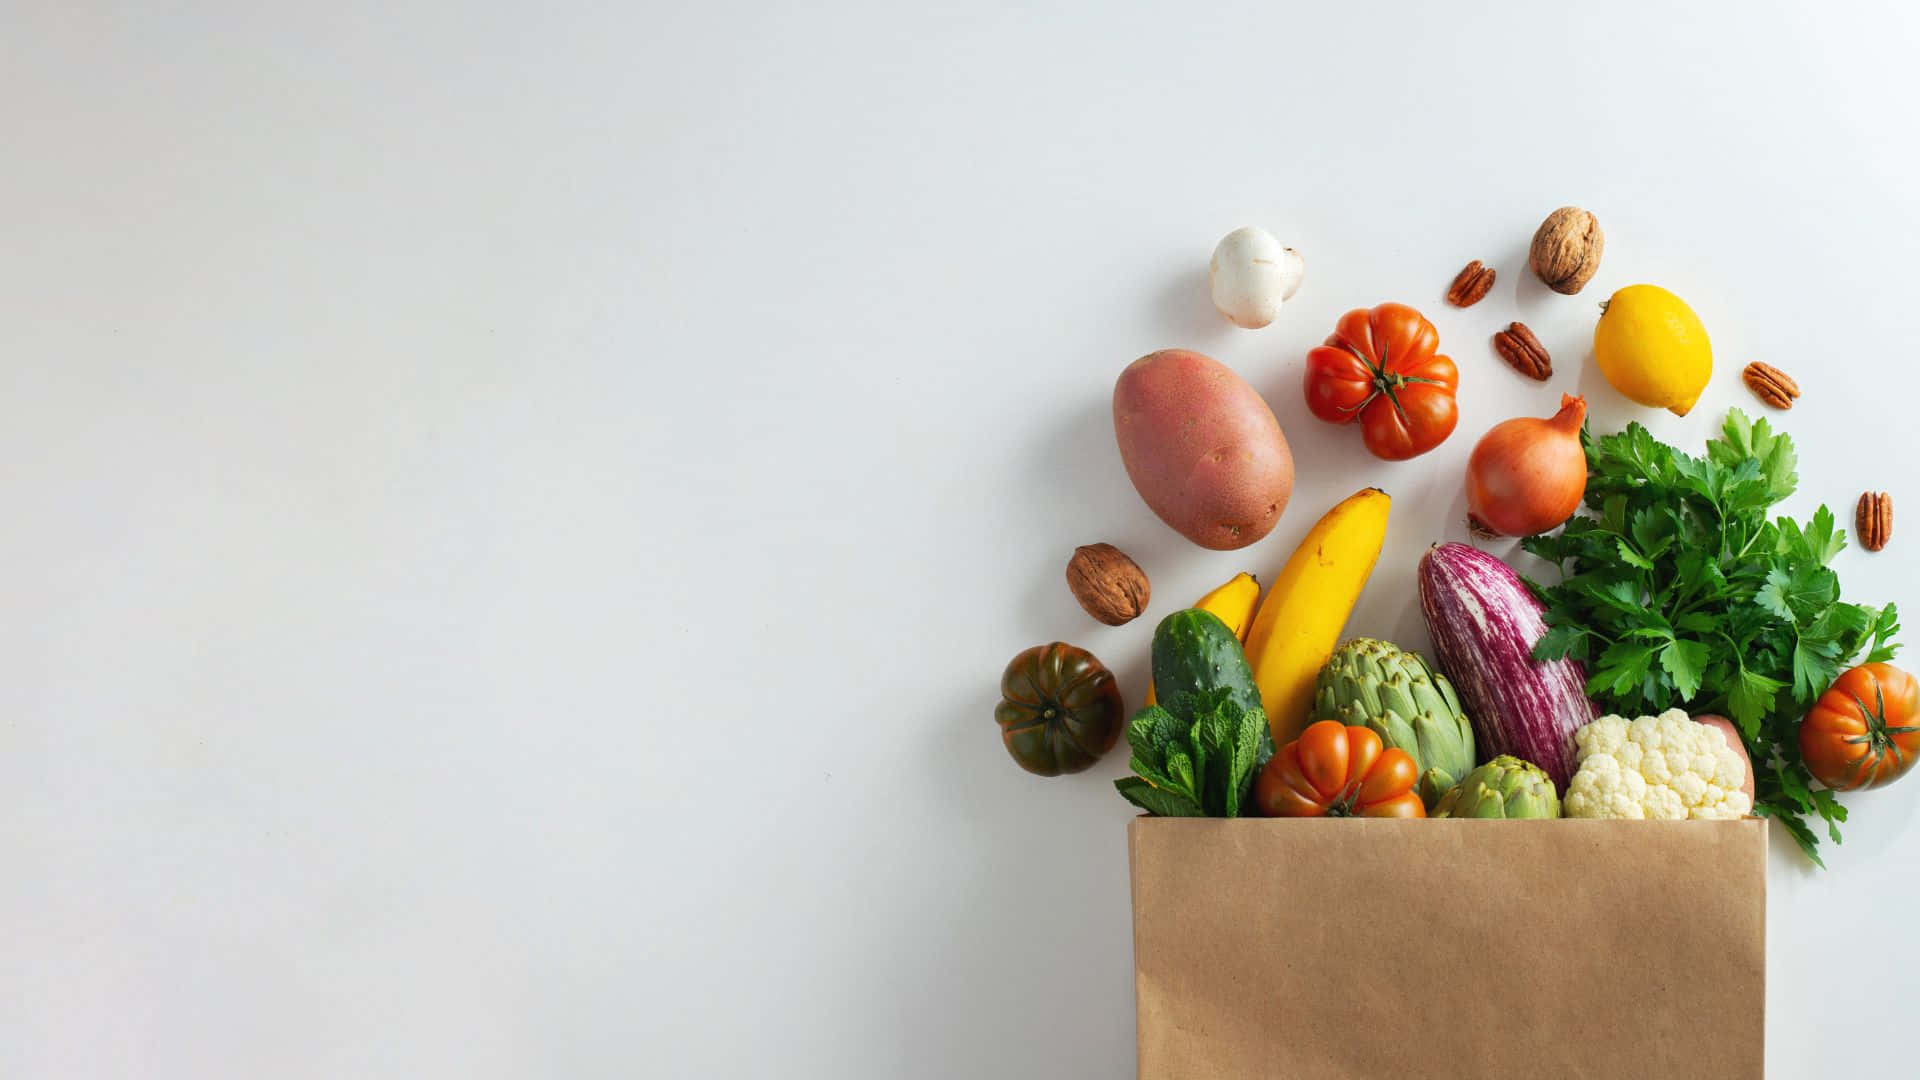 A Paper Bag Filled With Vegetables And Nuts